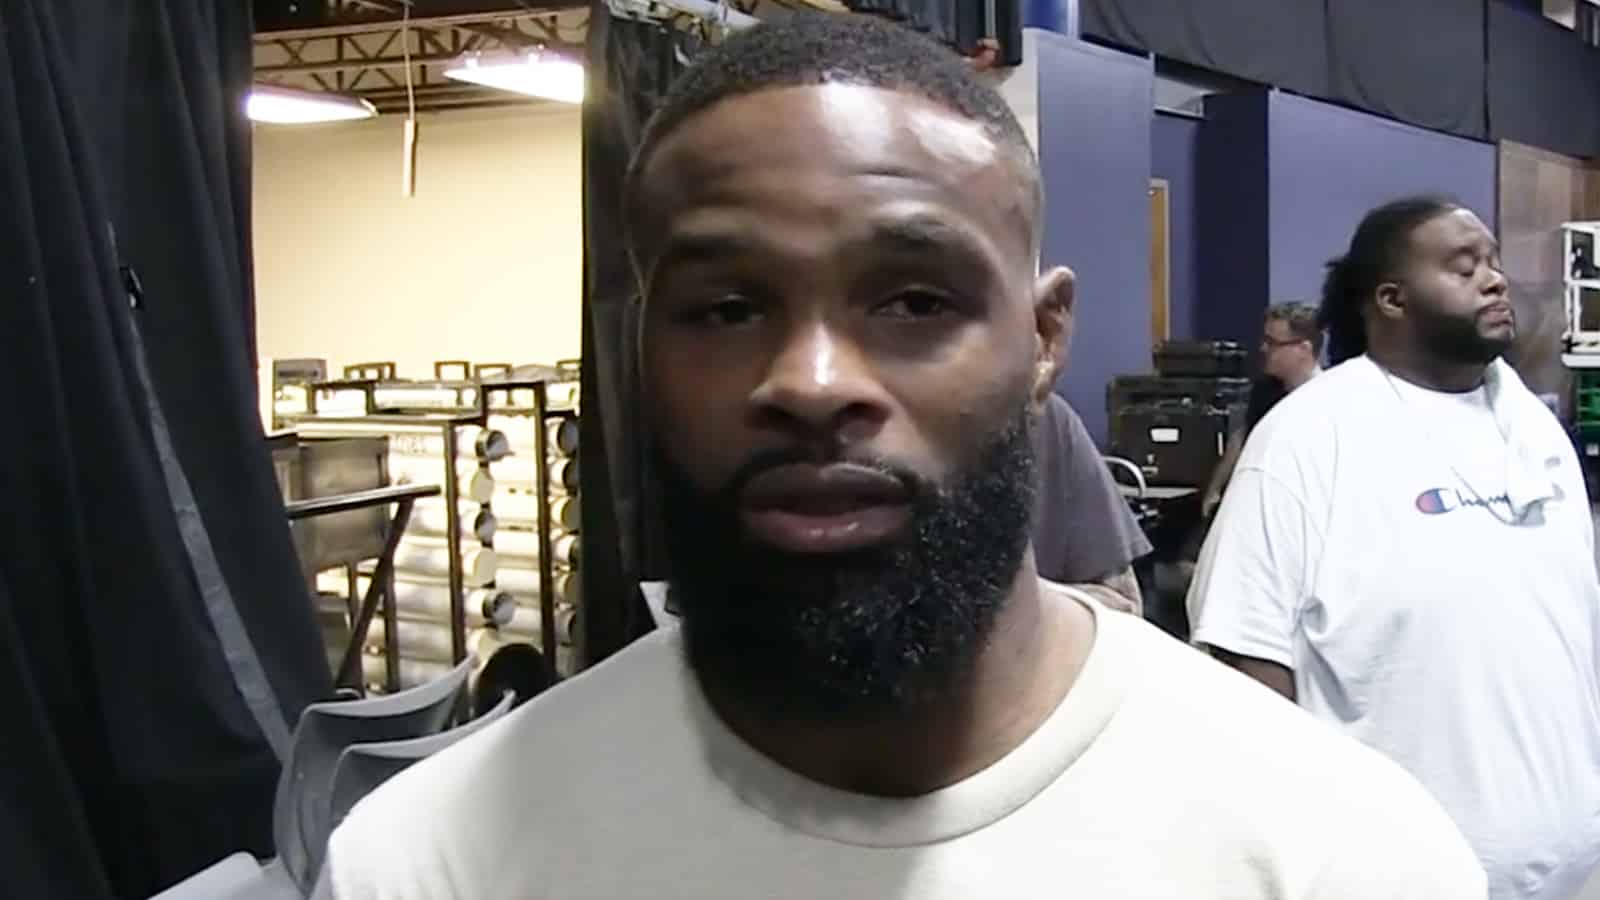 Tyron Woodley speaking to TMZ in post-fight intreview